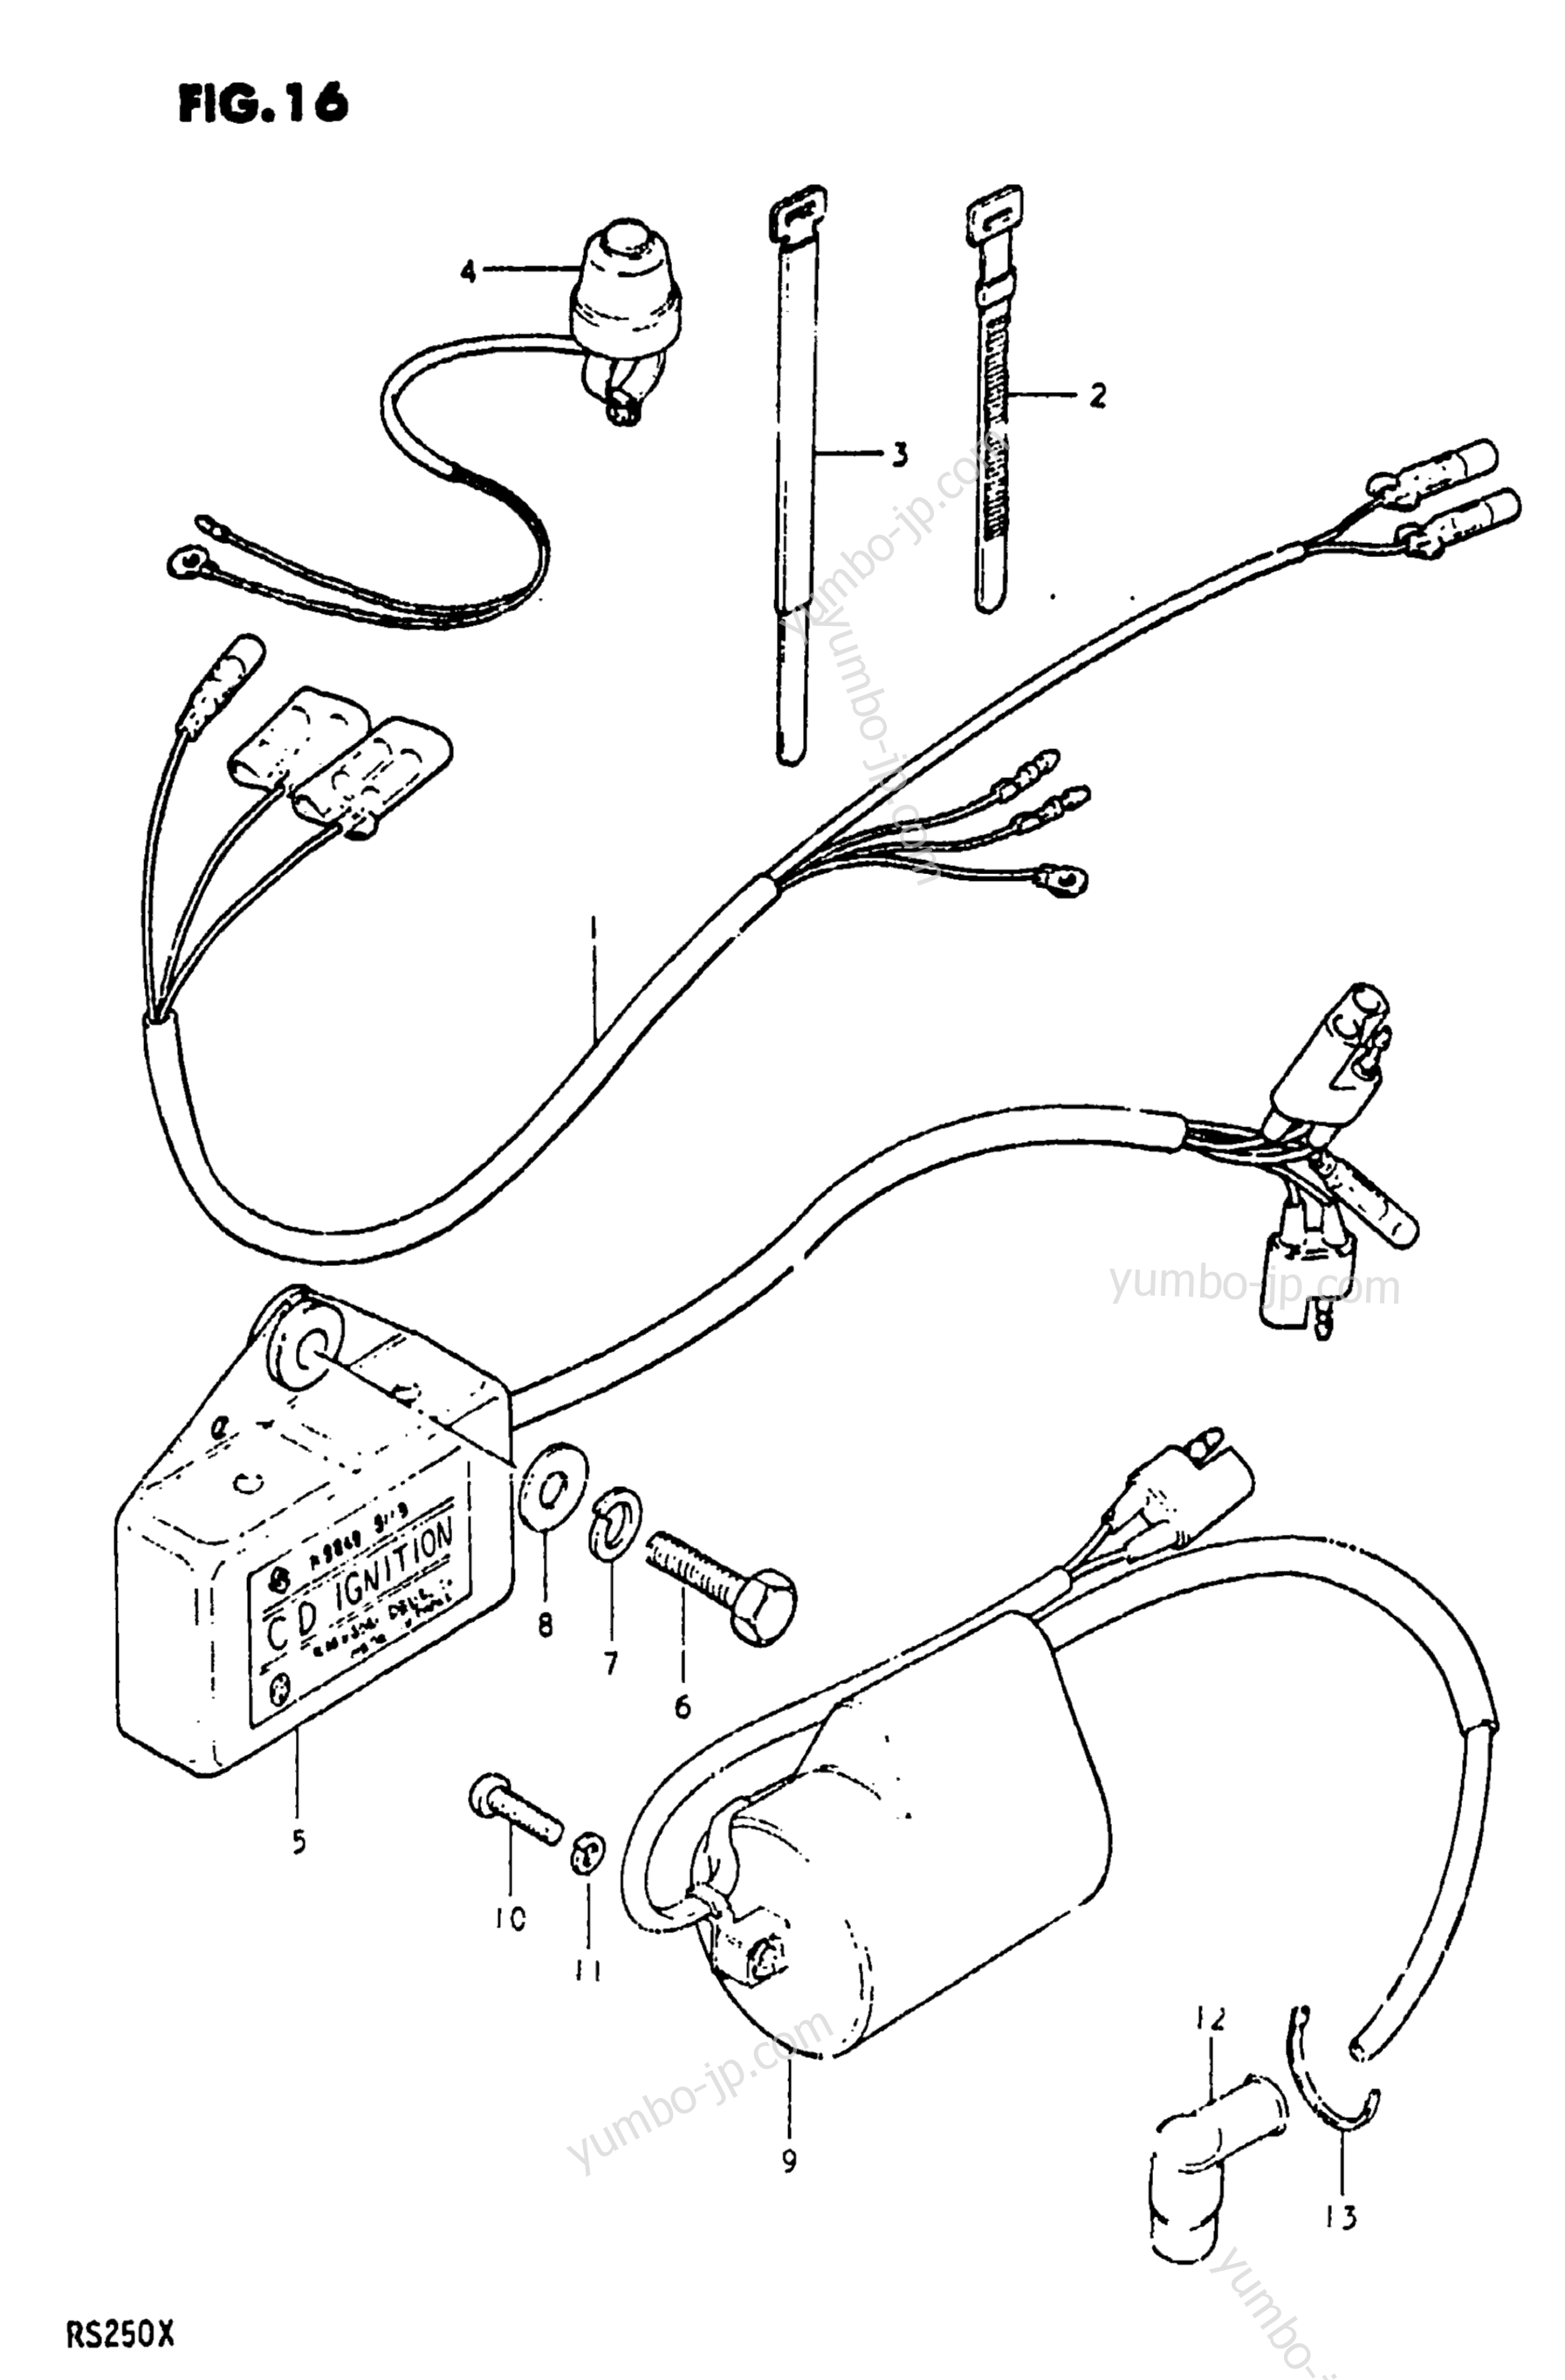 Electrical for motorcycles SUZUKI RS250 1981 year